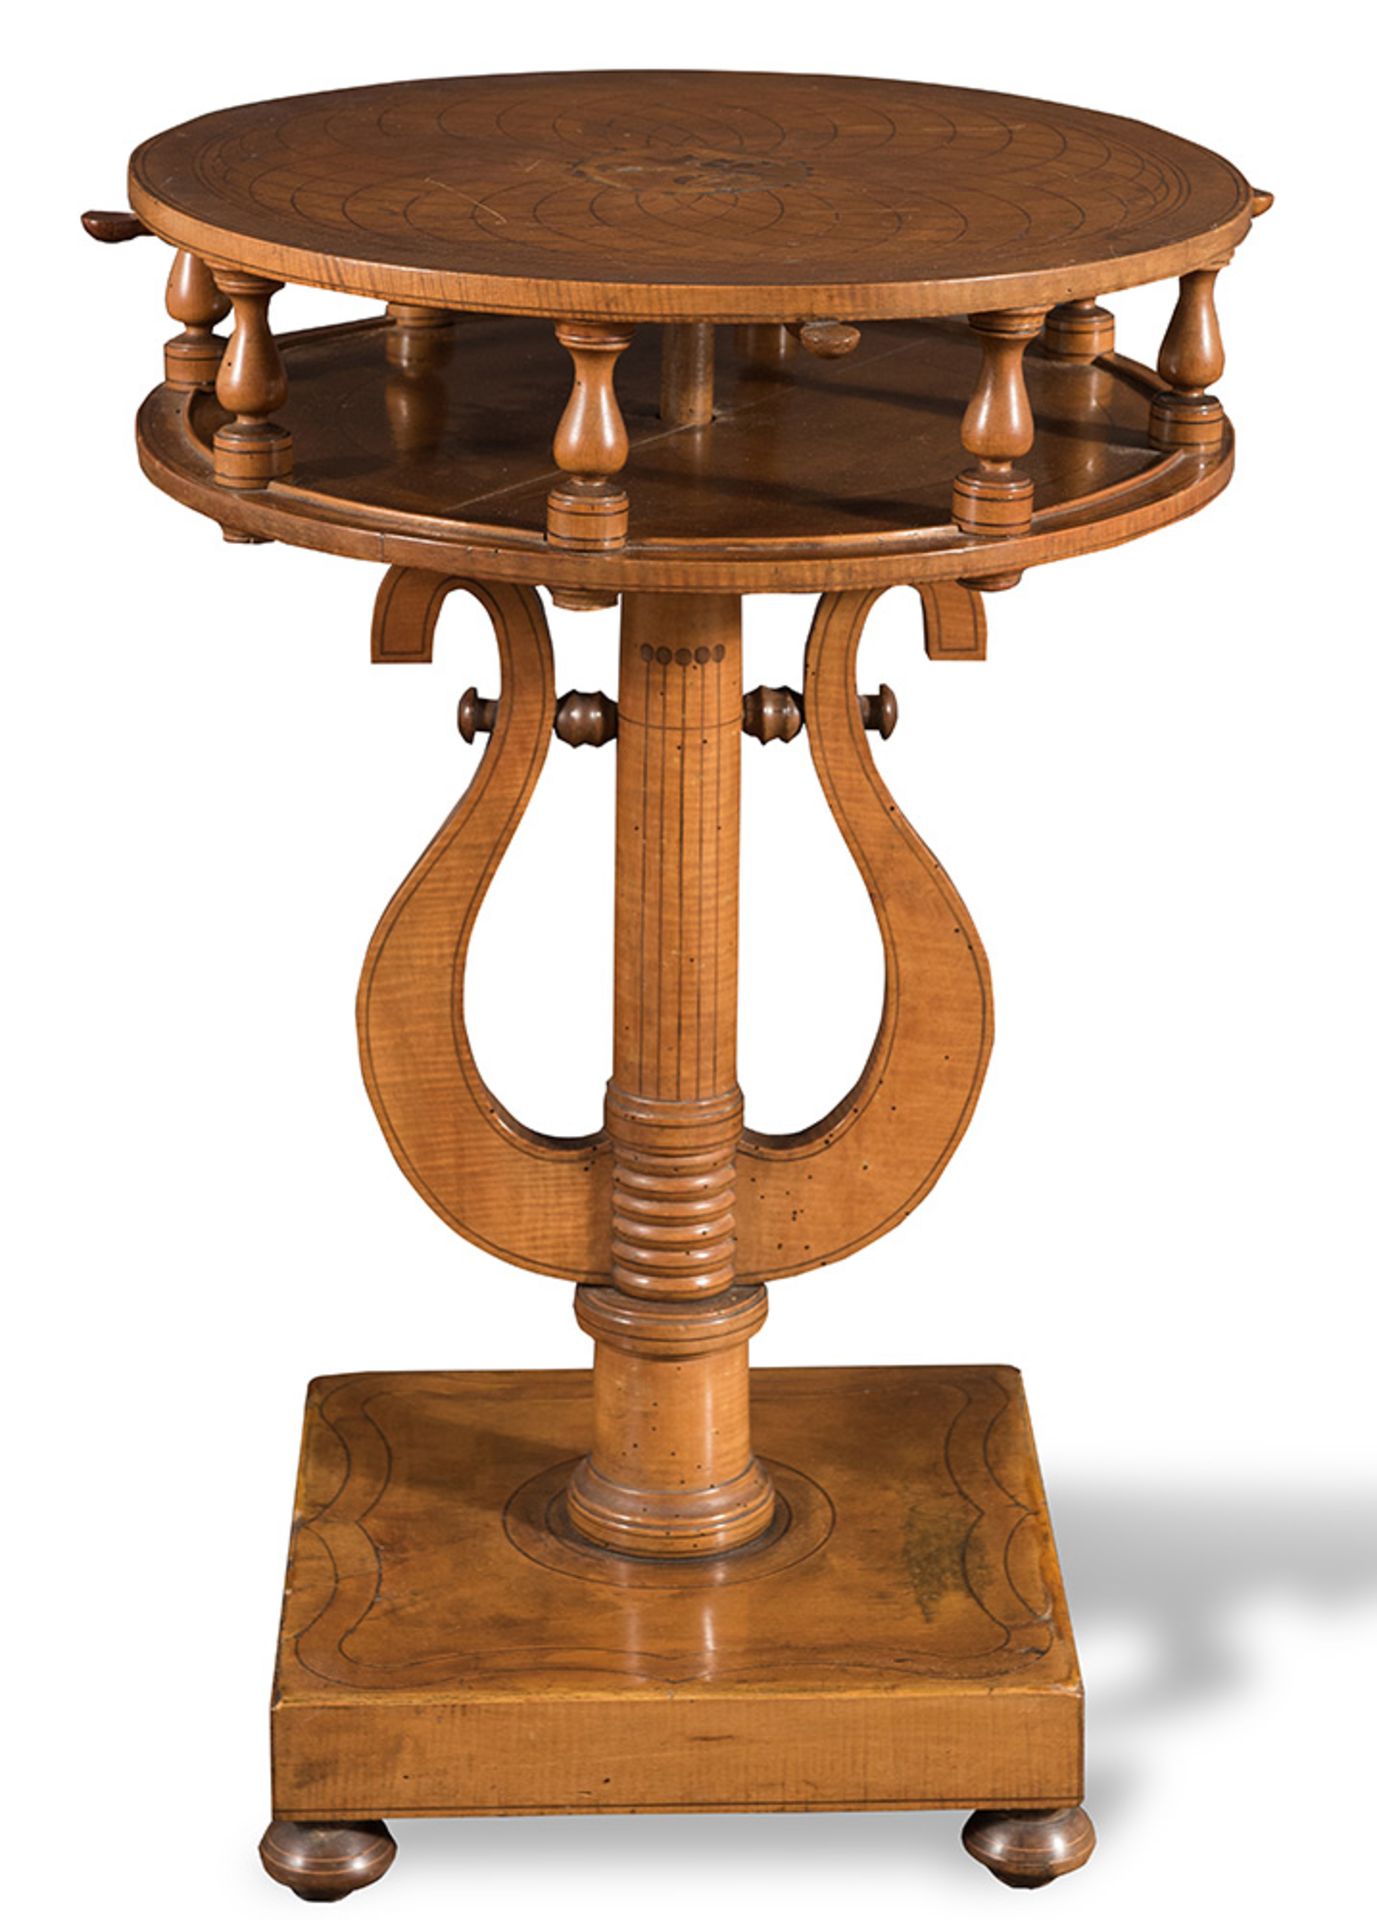 Cherry wood lyre table, round top, Marche, 19th Century